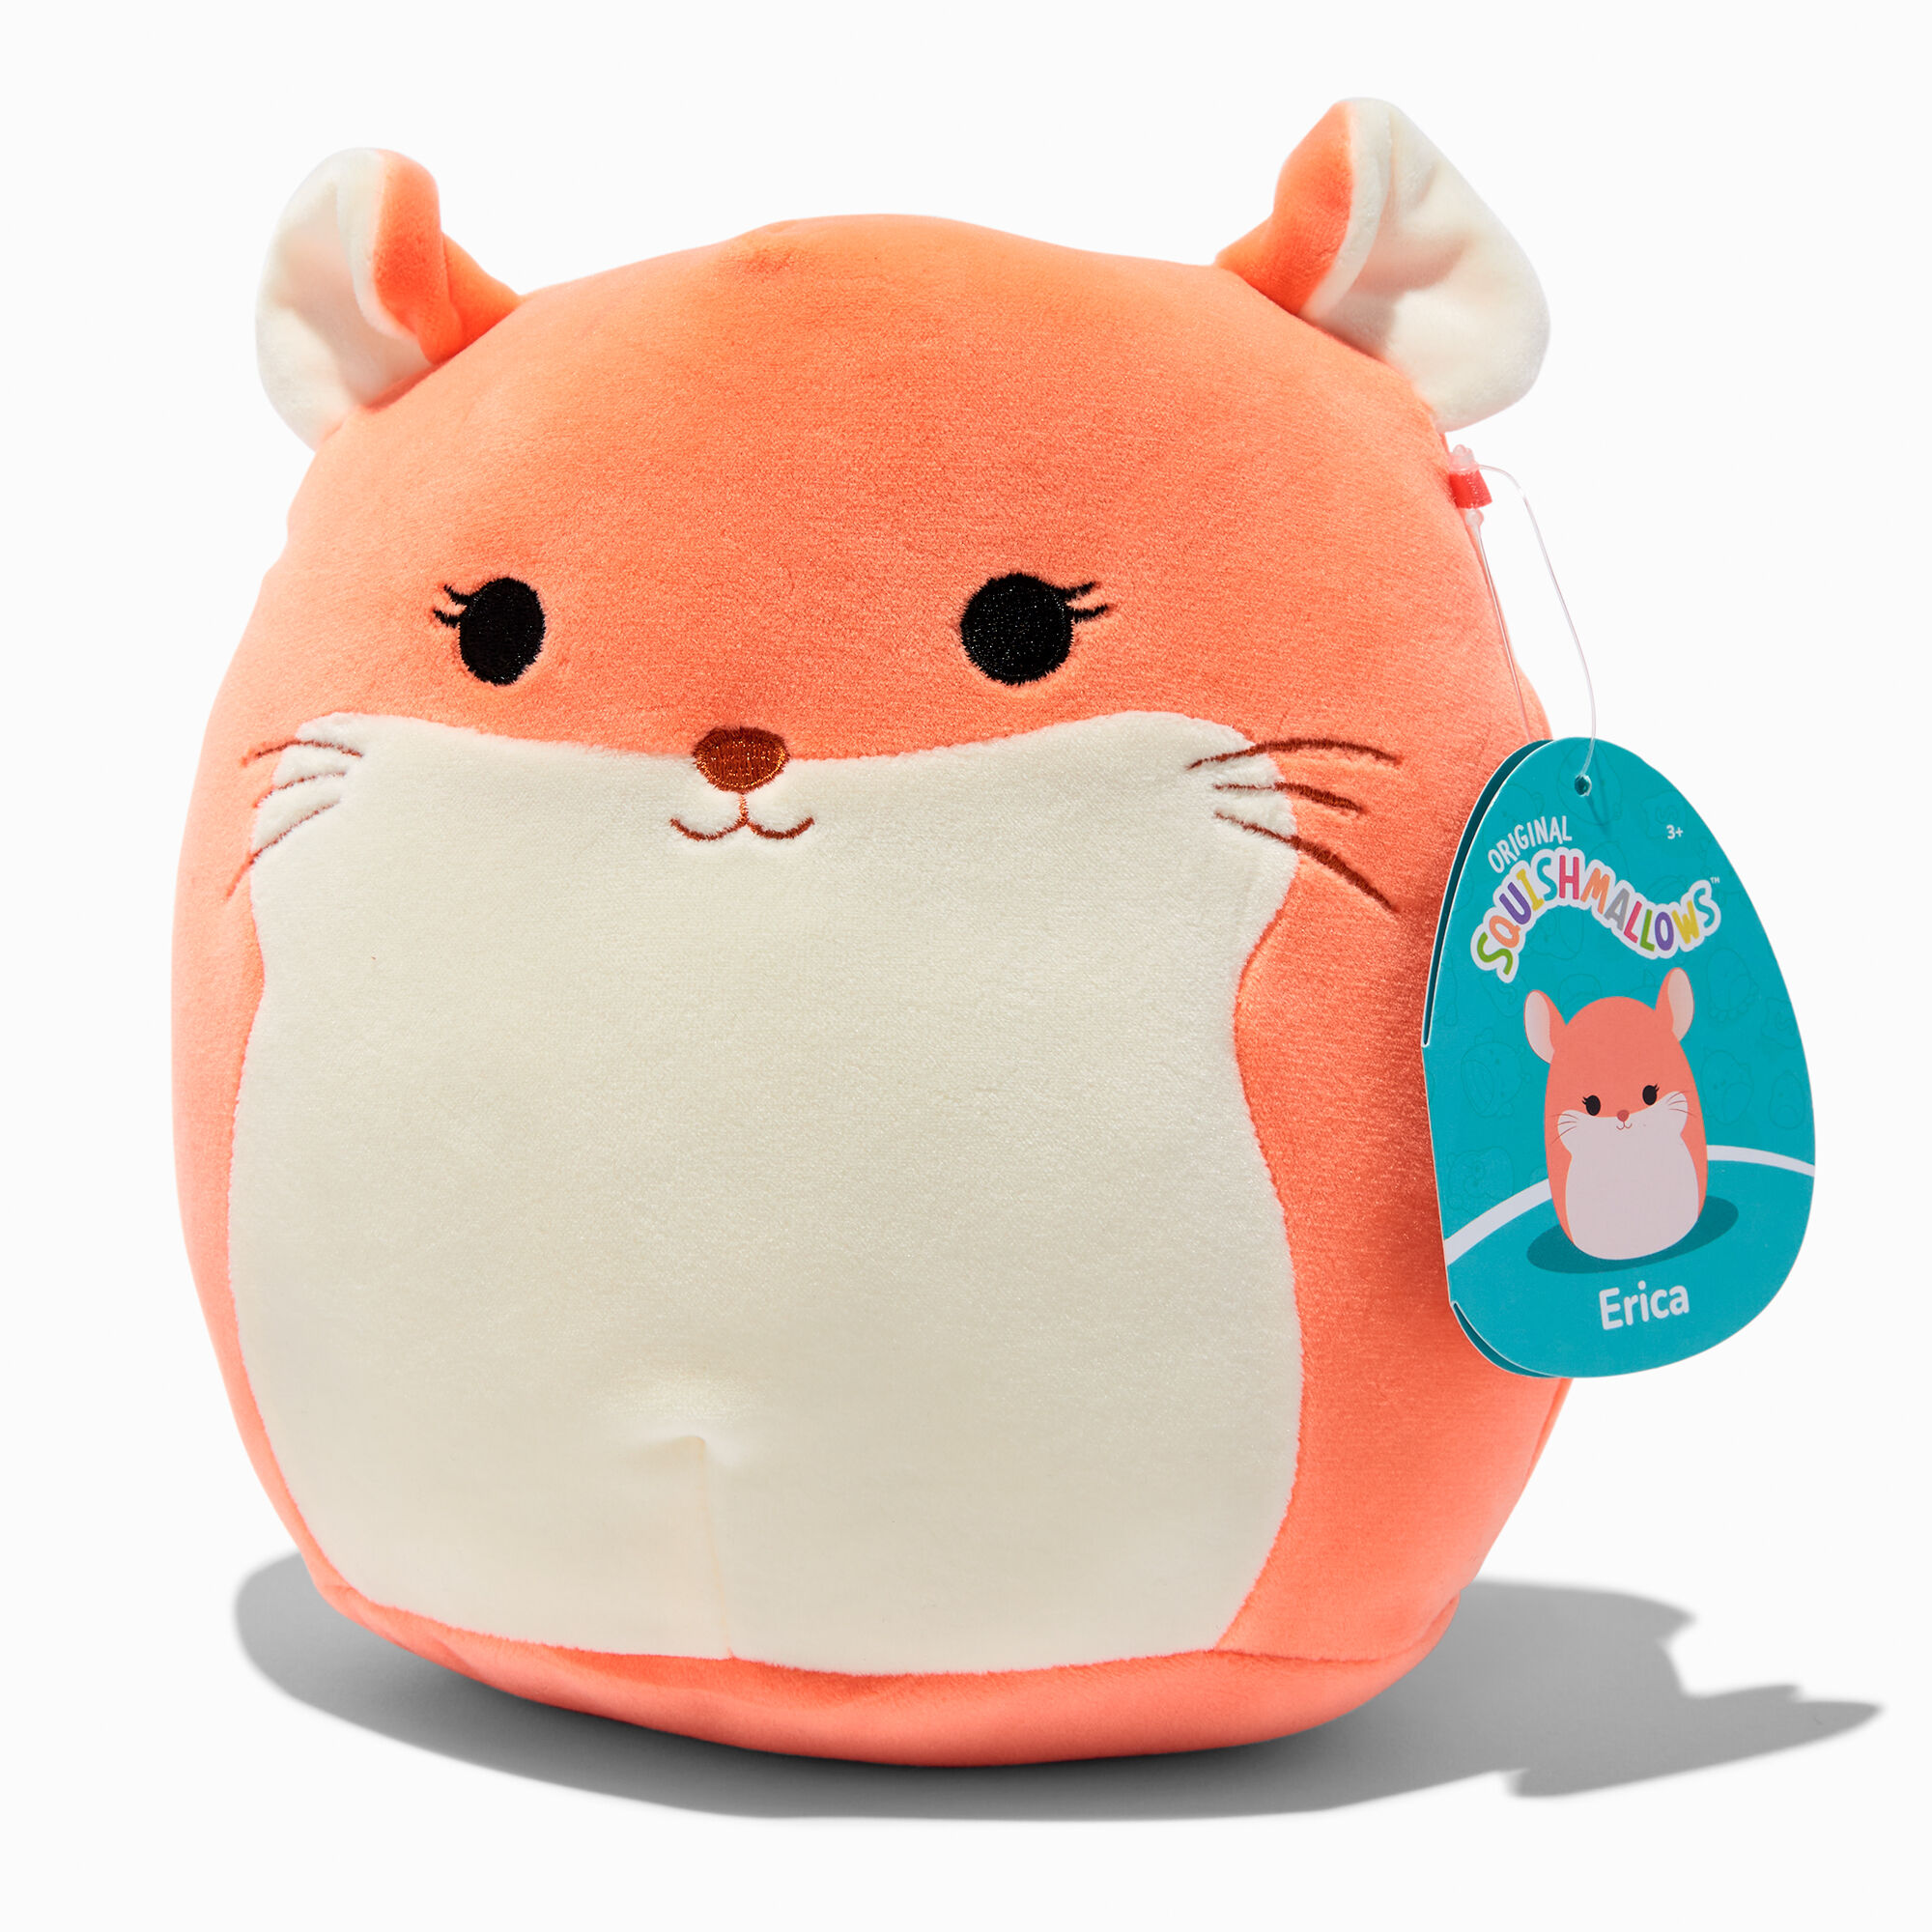 View Claires Squishmallows 8 Erica Soft Toy information